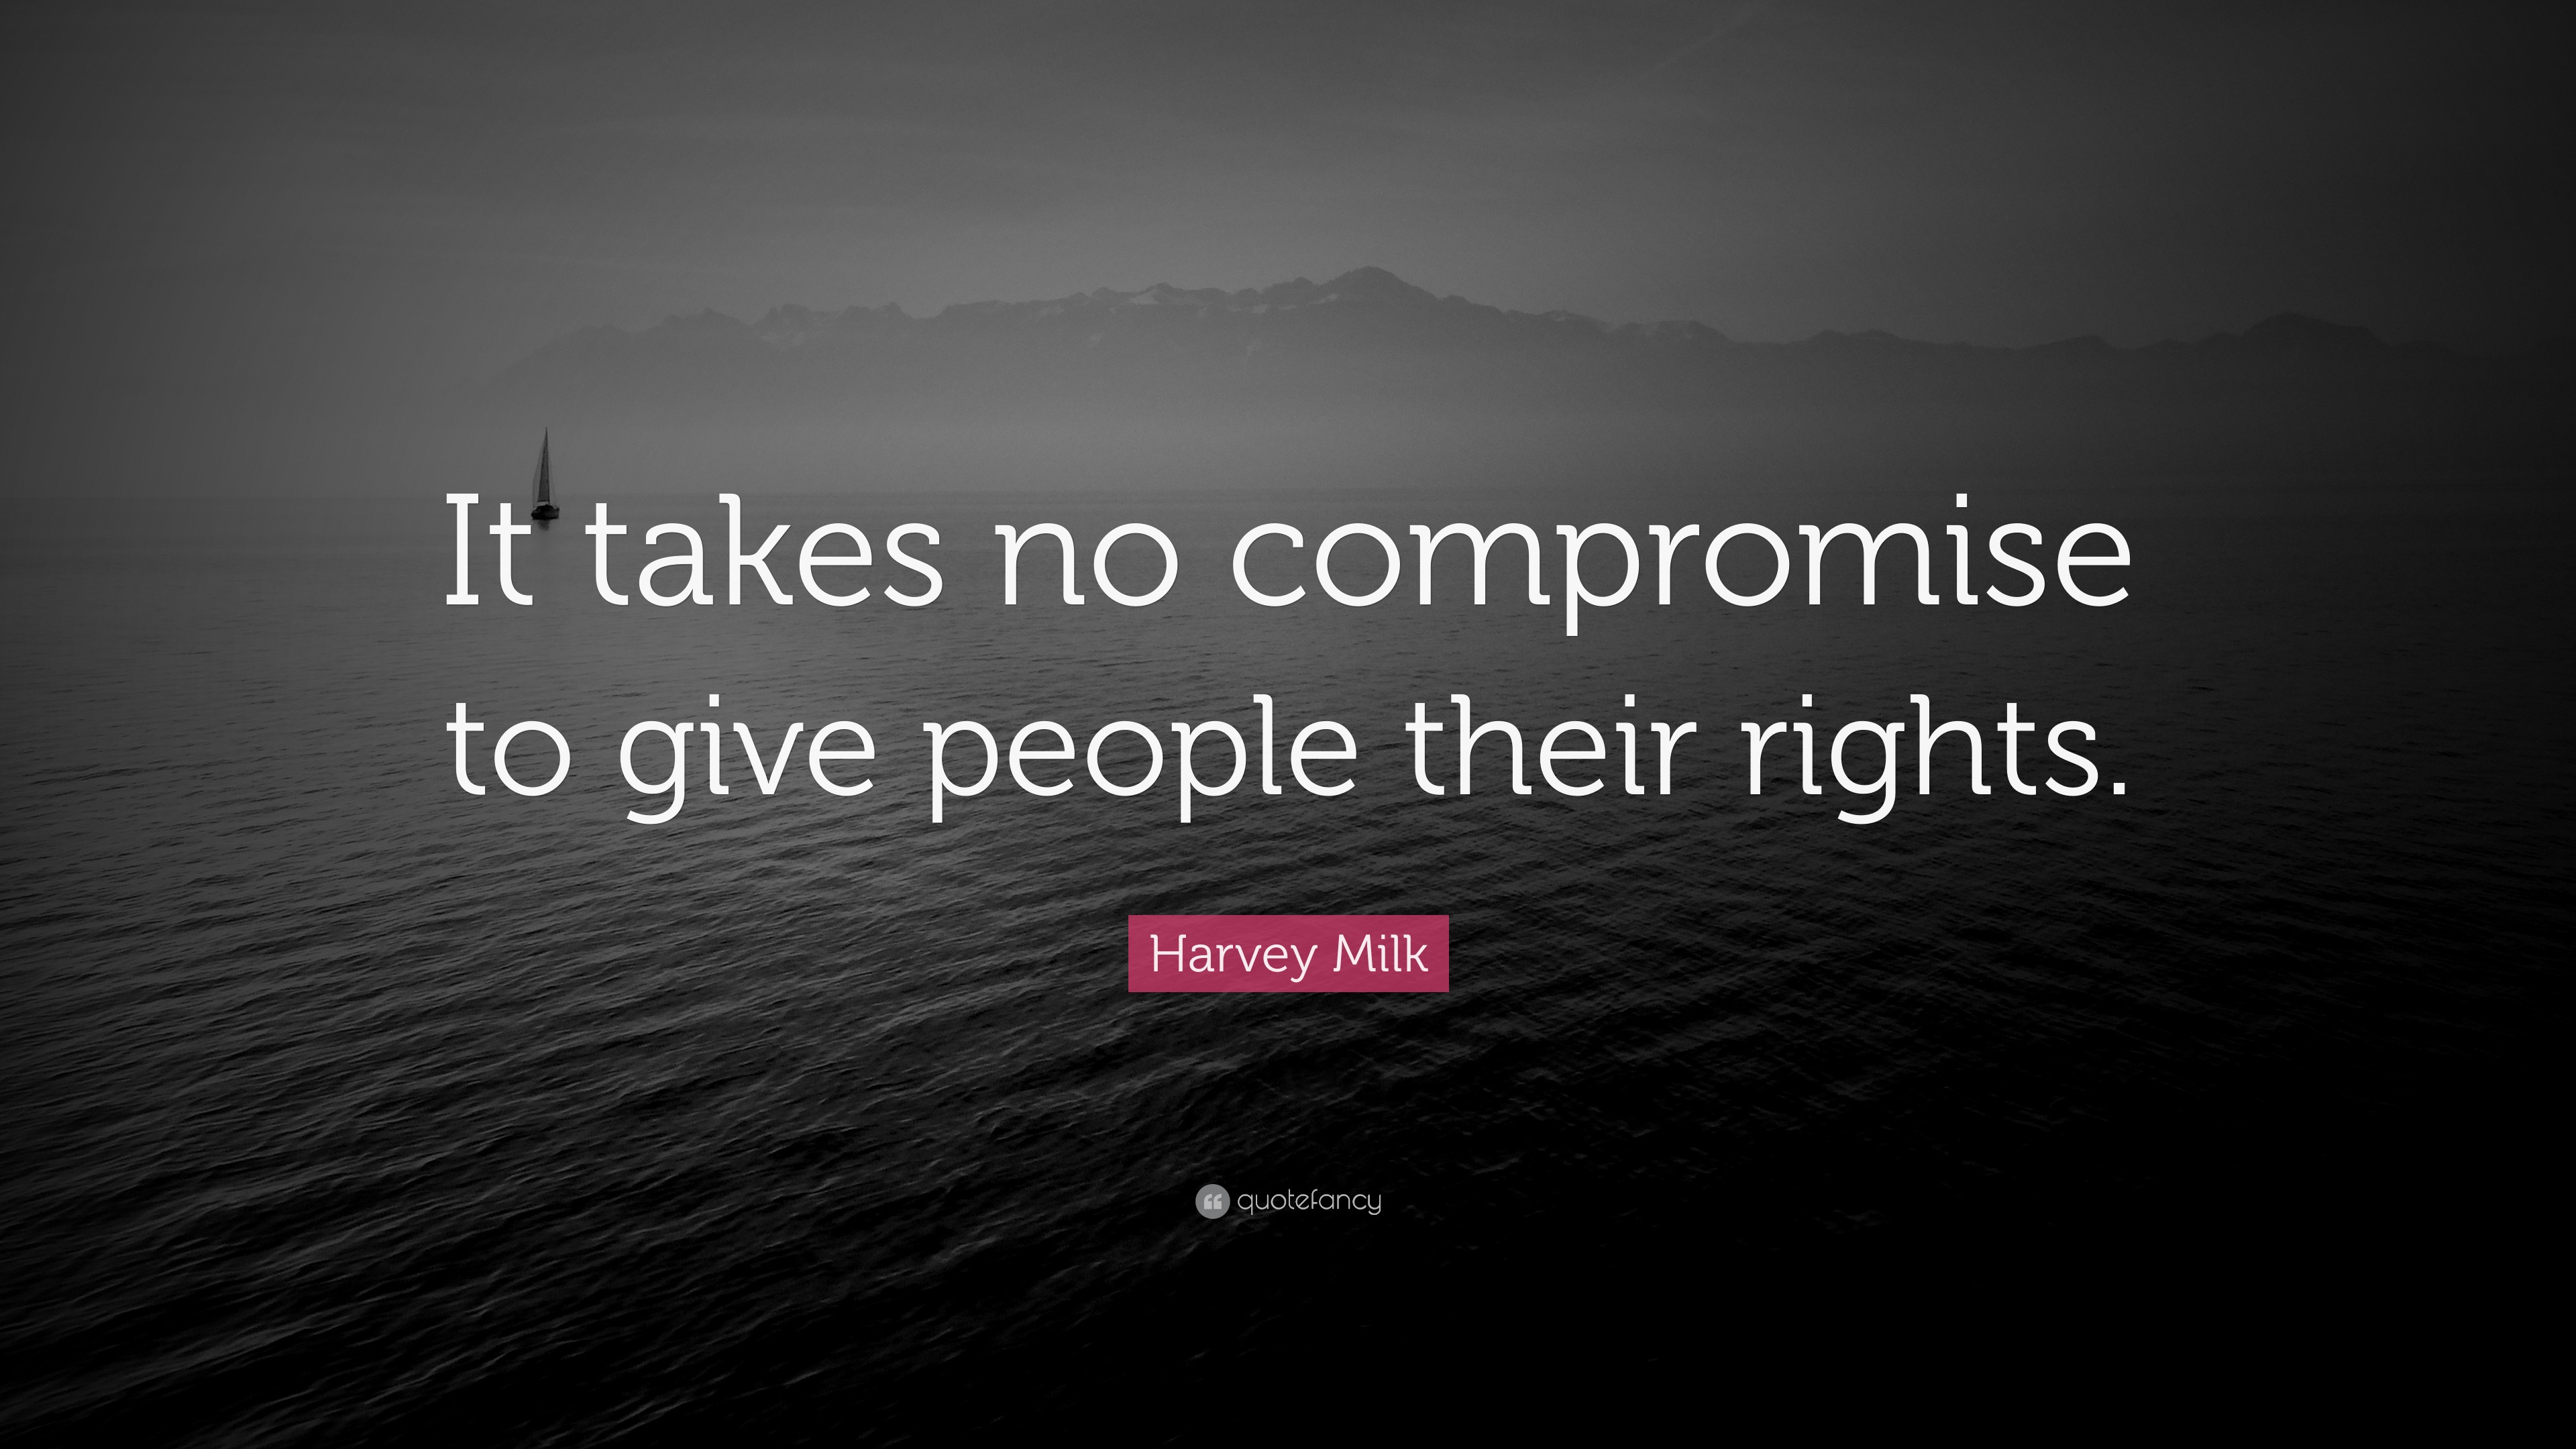 Harvey Milk Quote: “It takes no compromise to give people their rights.”